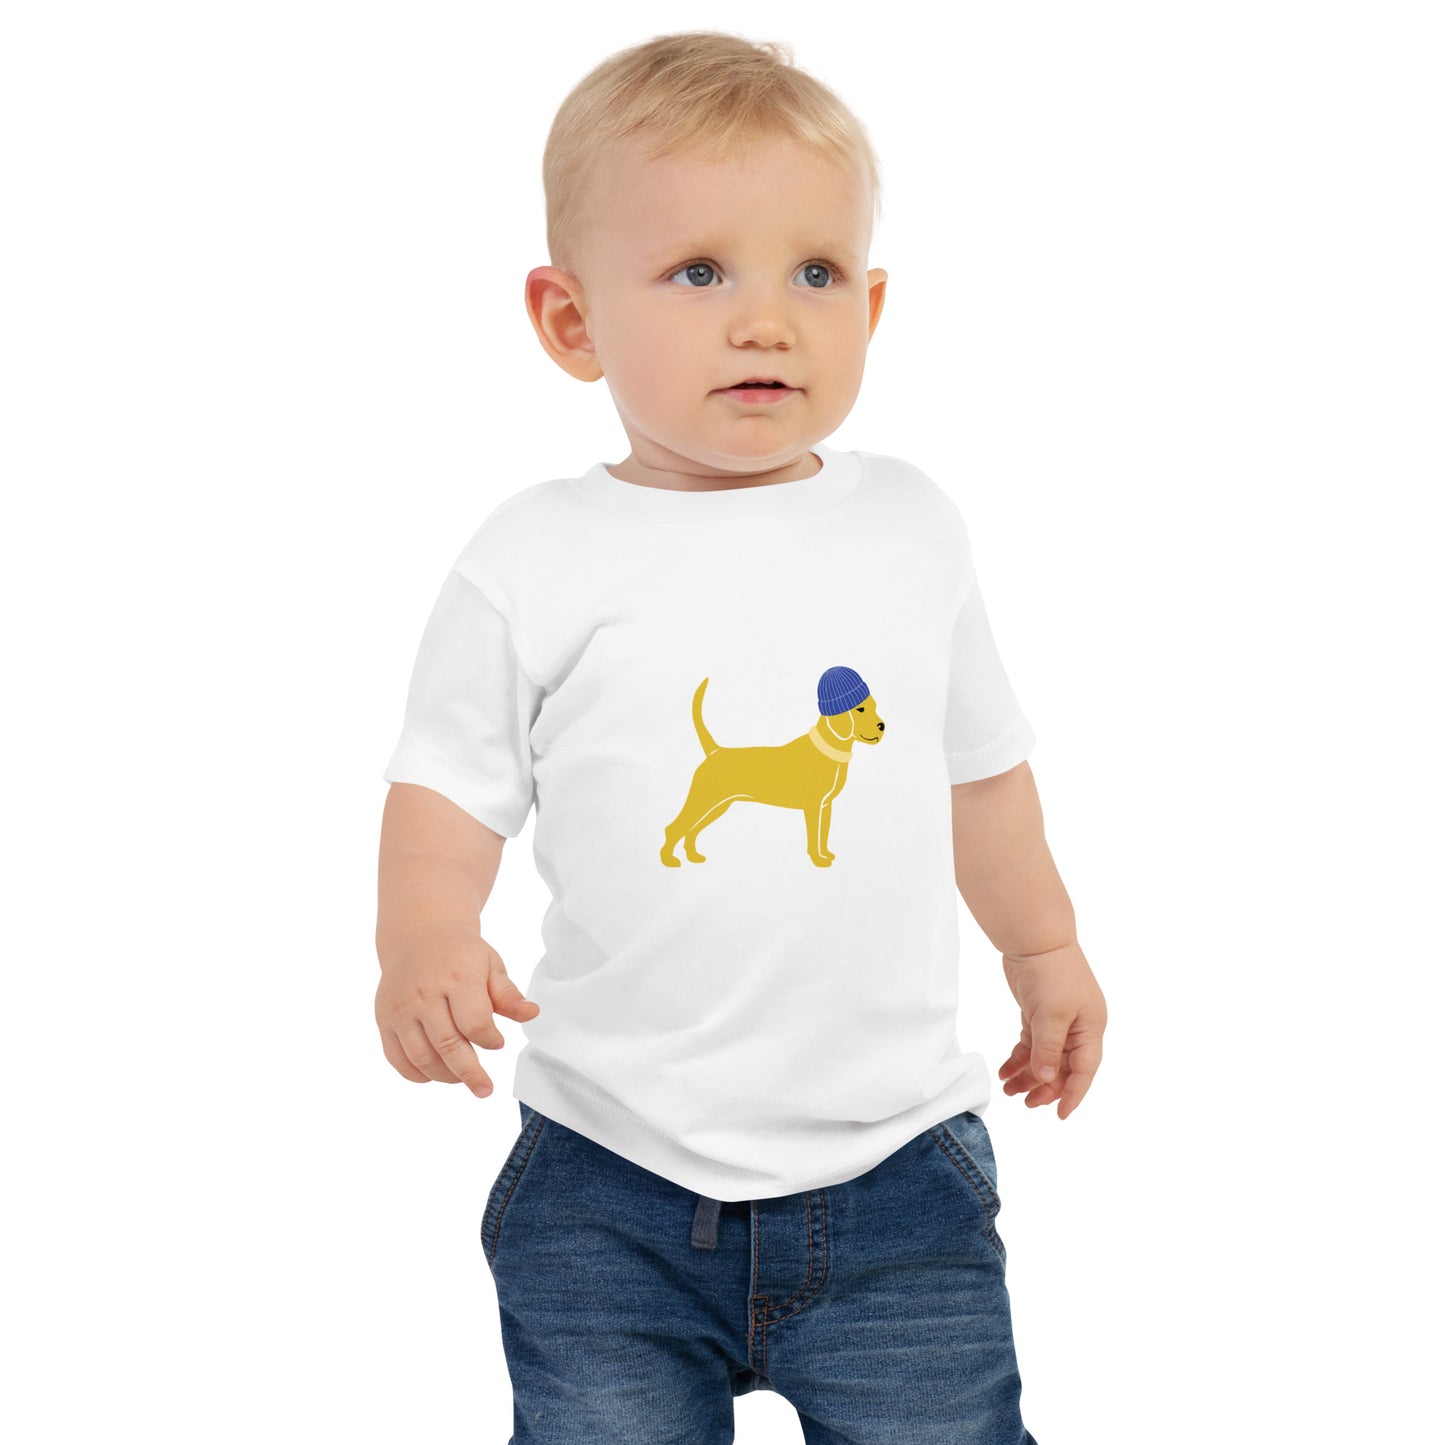 Unleashed Life Little Yellow Dog with Hat Baby Jersey Short Sleeve Tee